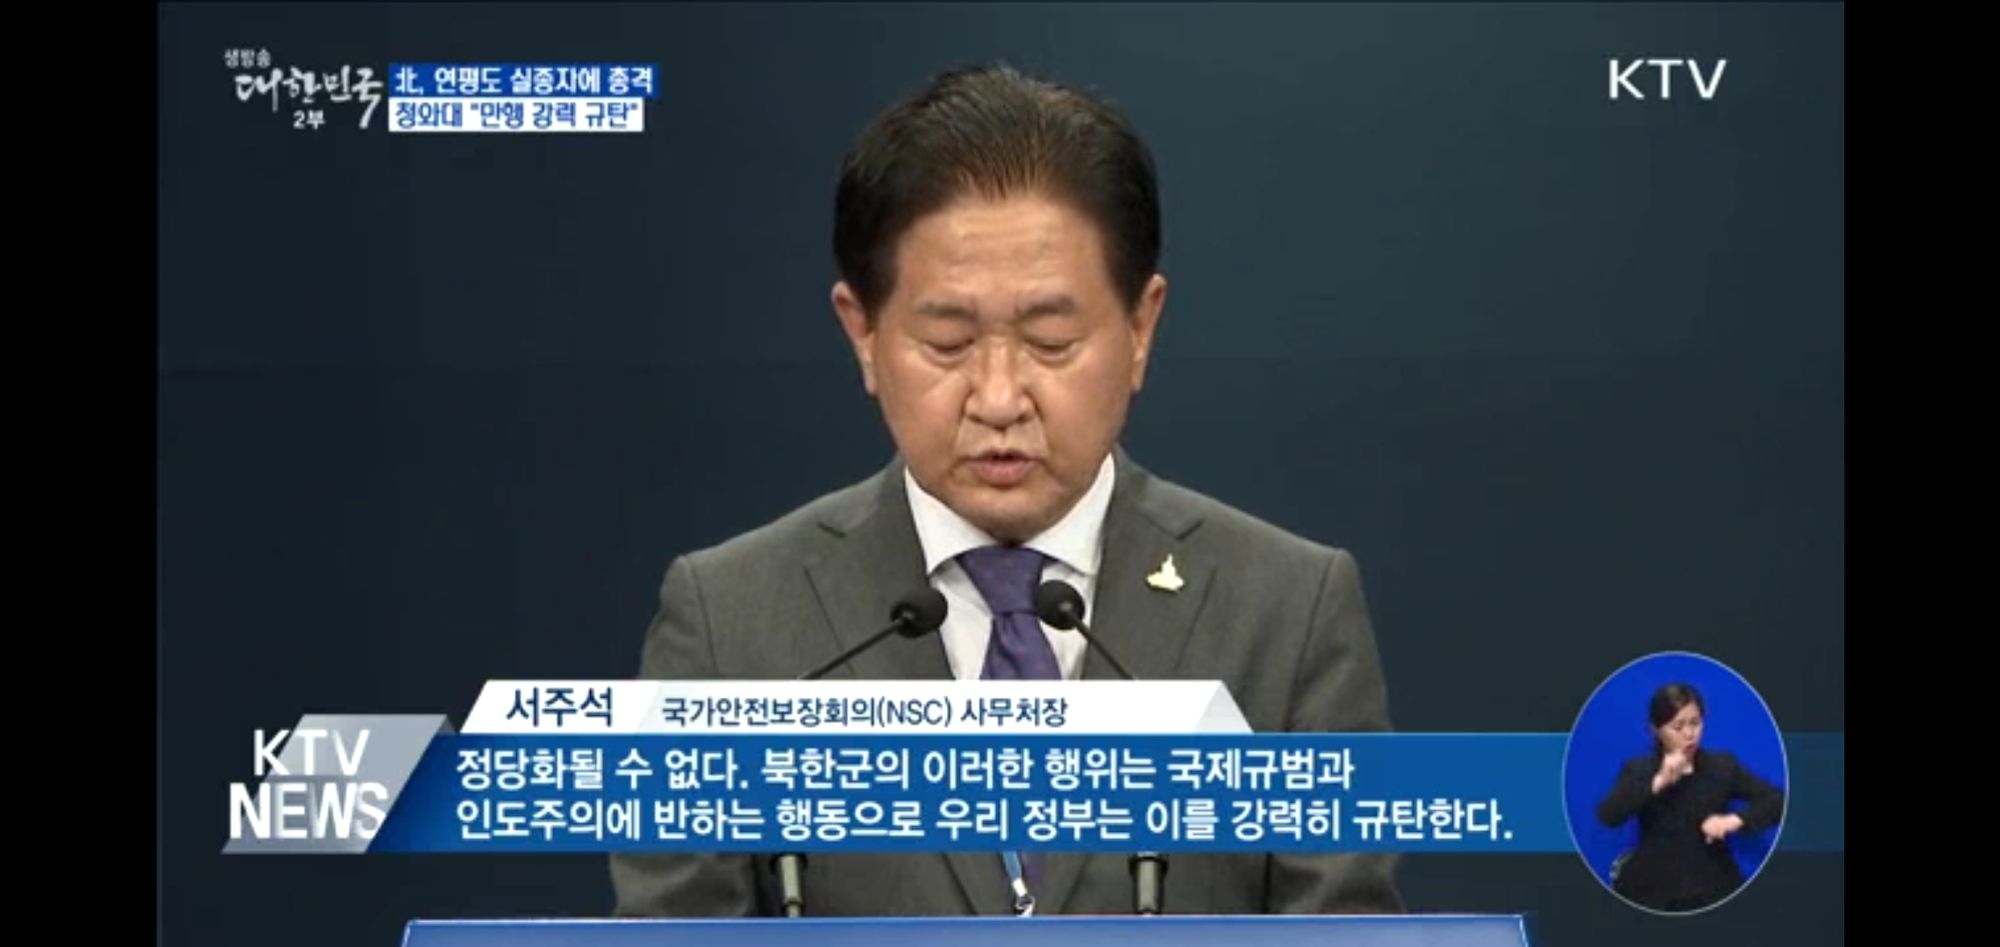 Breaking News Analysis: North Korea Kills and Burns the Body of a Defecting South Korean Official